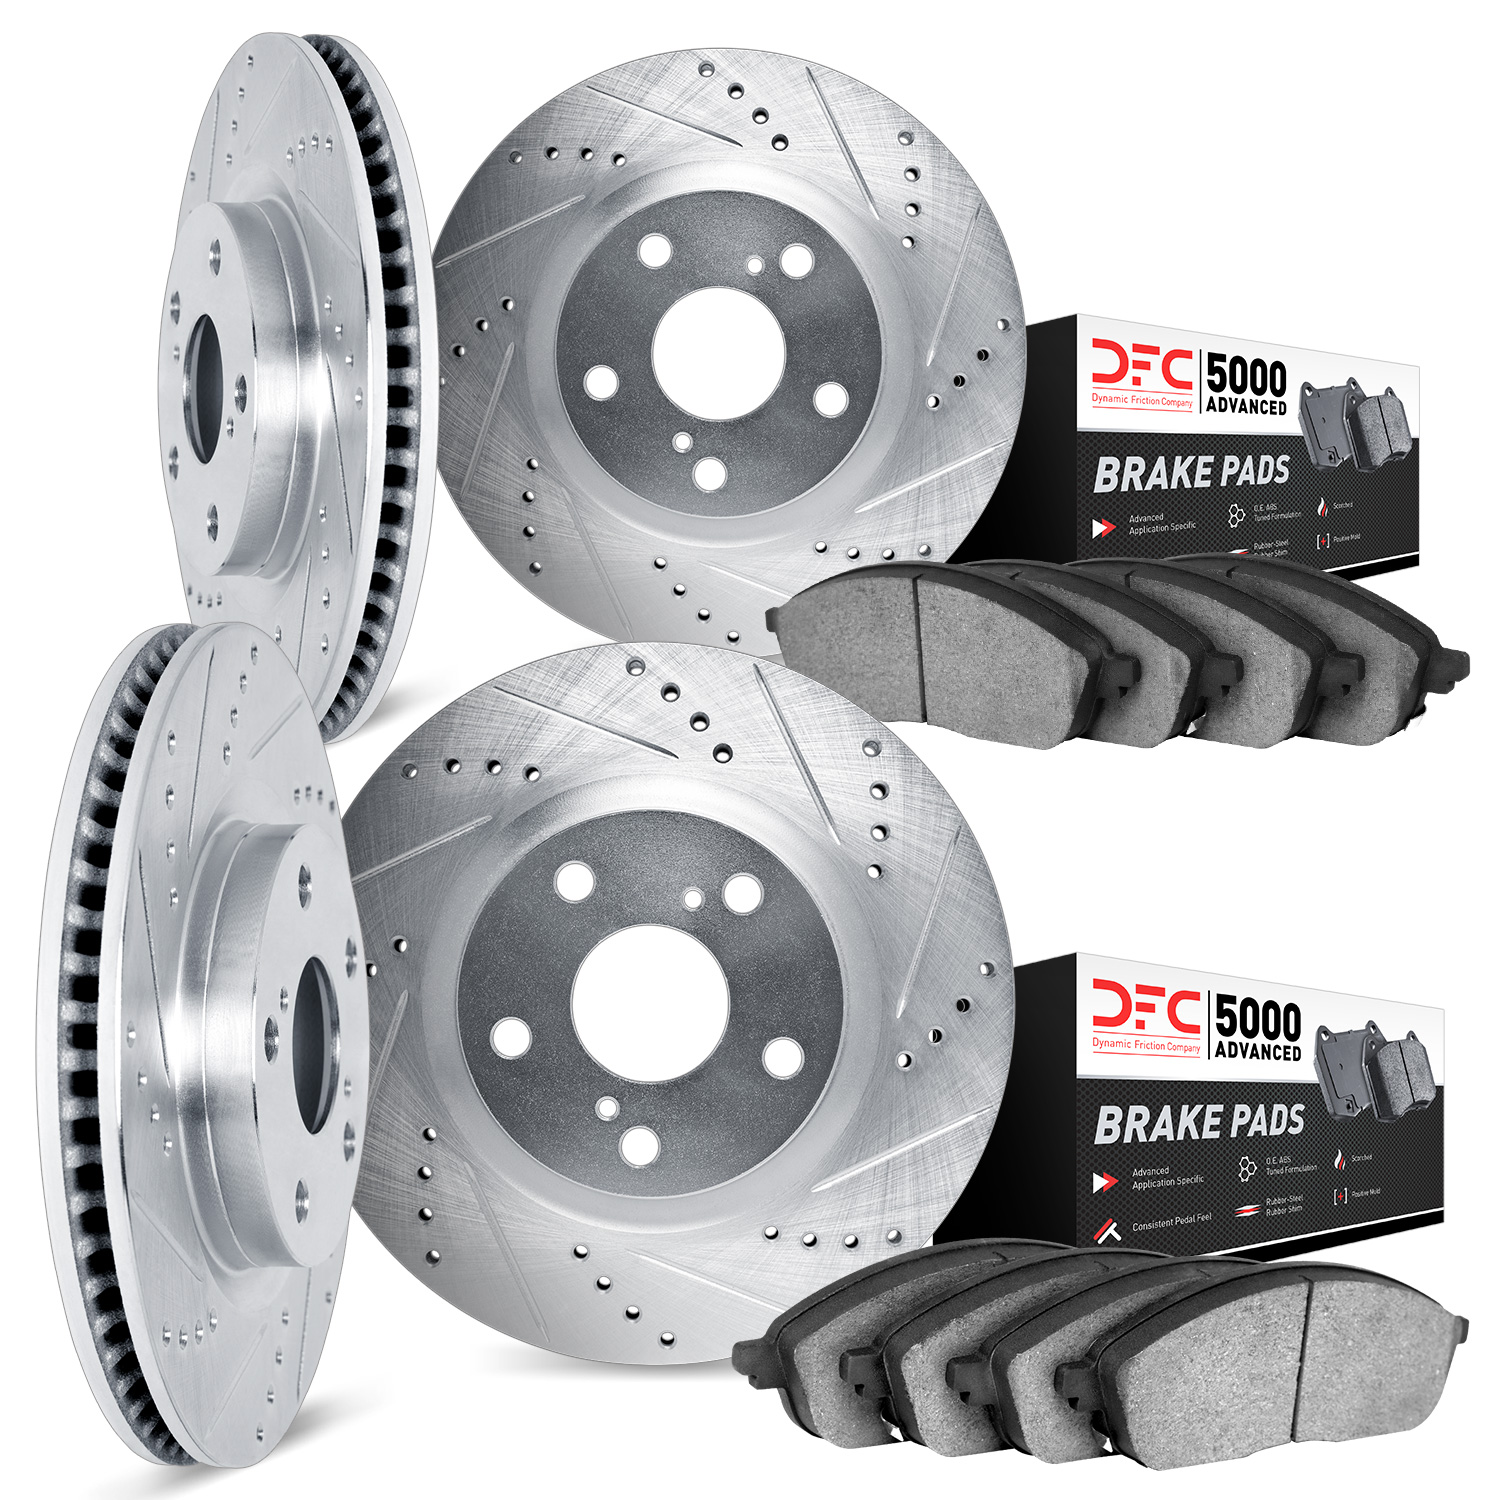 7504-76146 Drilled/Slotted Brake Rotors w/5000 Advanced Brake Pads Kit [Silver], 1993-1998 Lexus/Toyota/Scion, Position: Front a